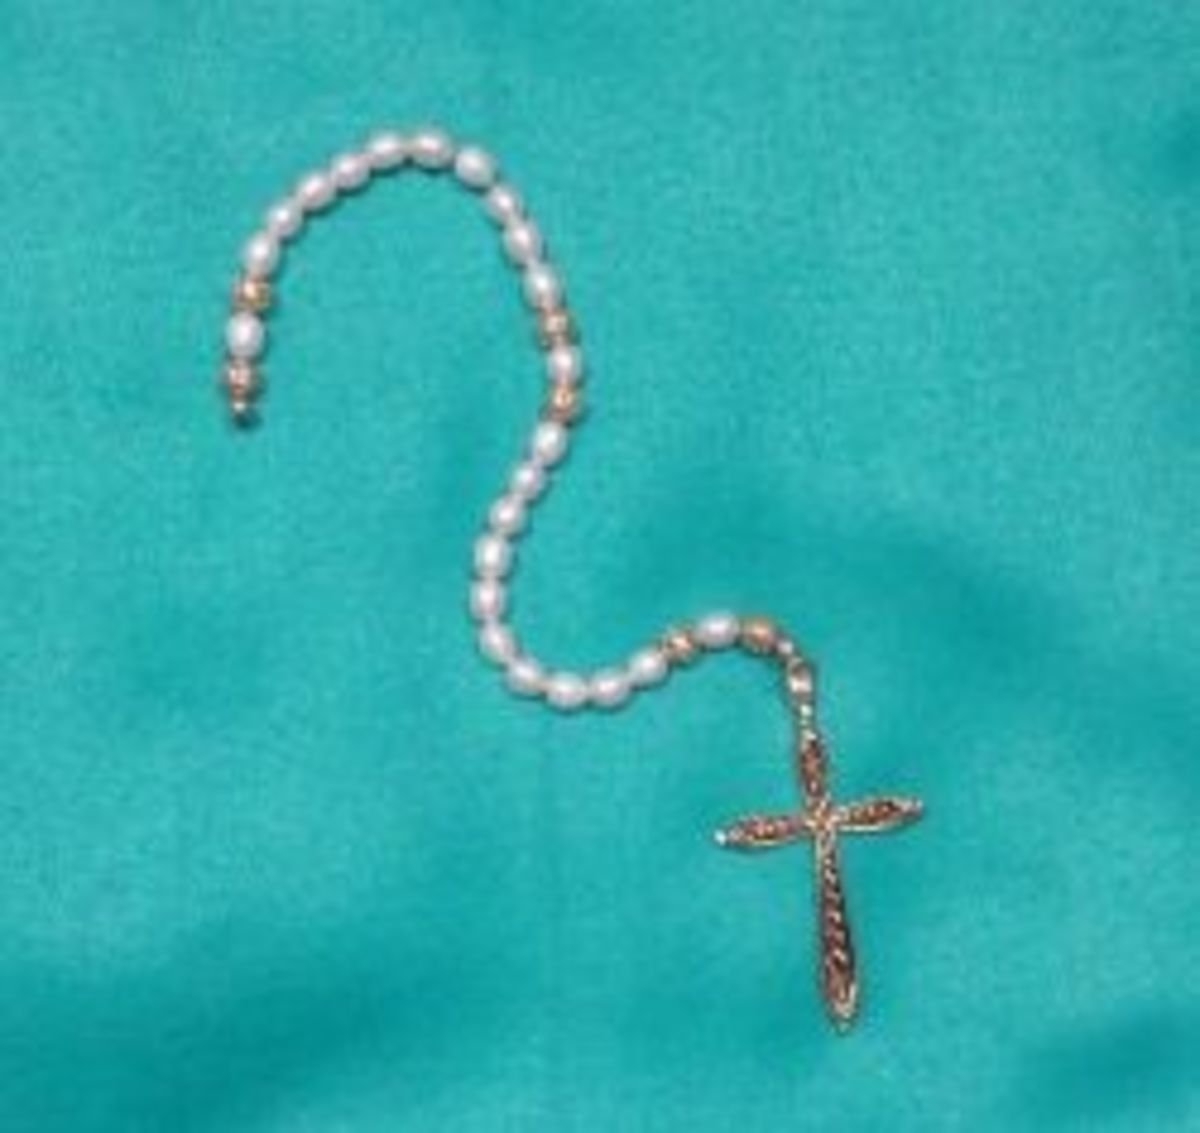 These are my prayer beads that I made from freshwater pearls.